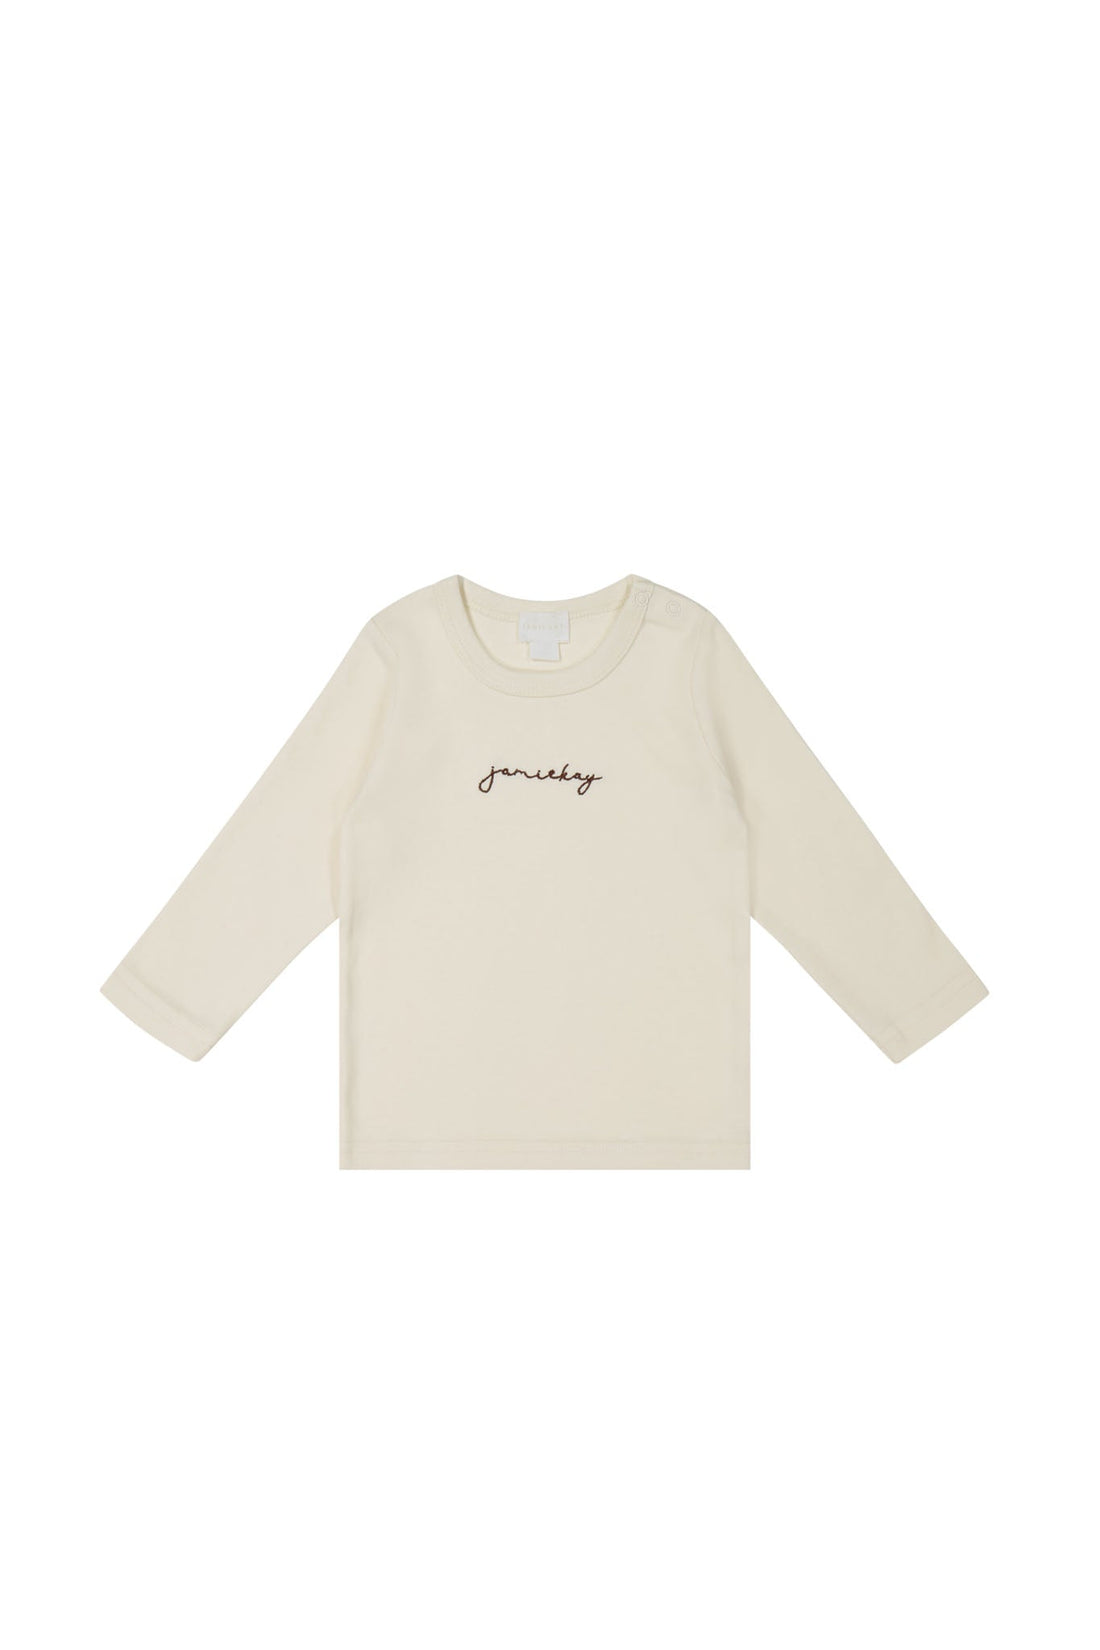 Pima Cotton Vinny Long Sleeve Top - Cloud Childrens Top from Jamie Kay USA